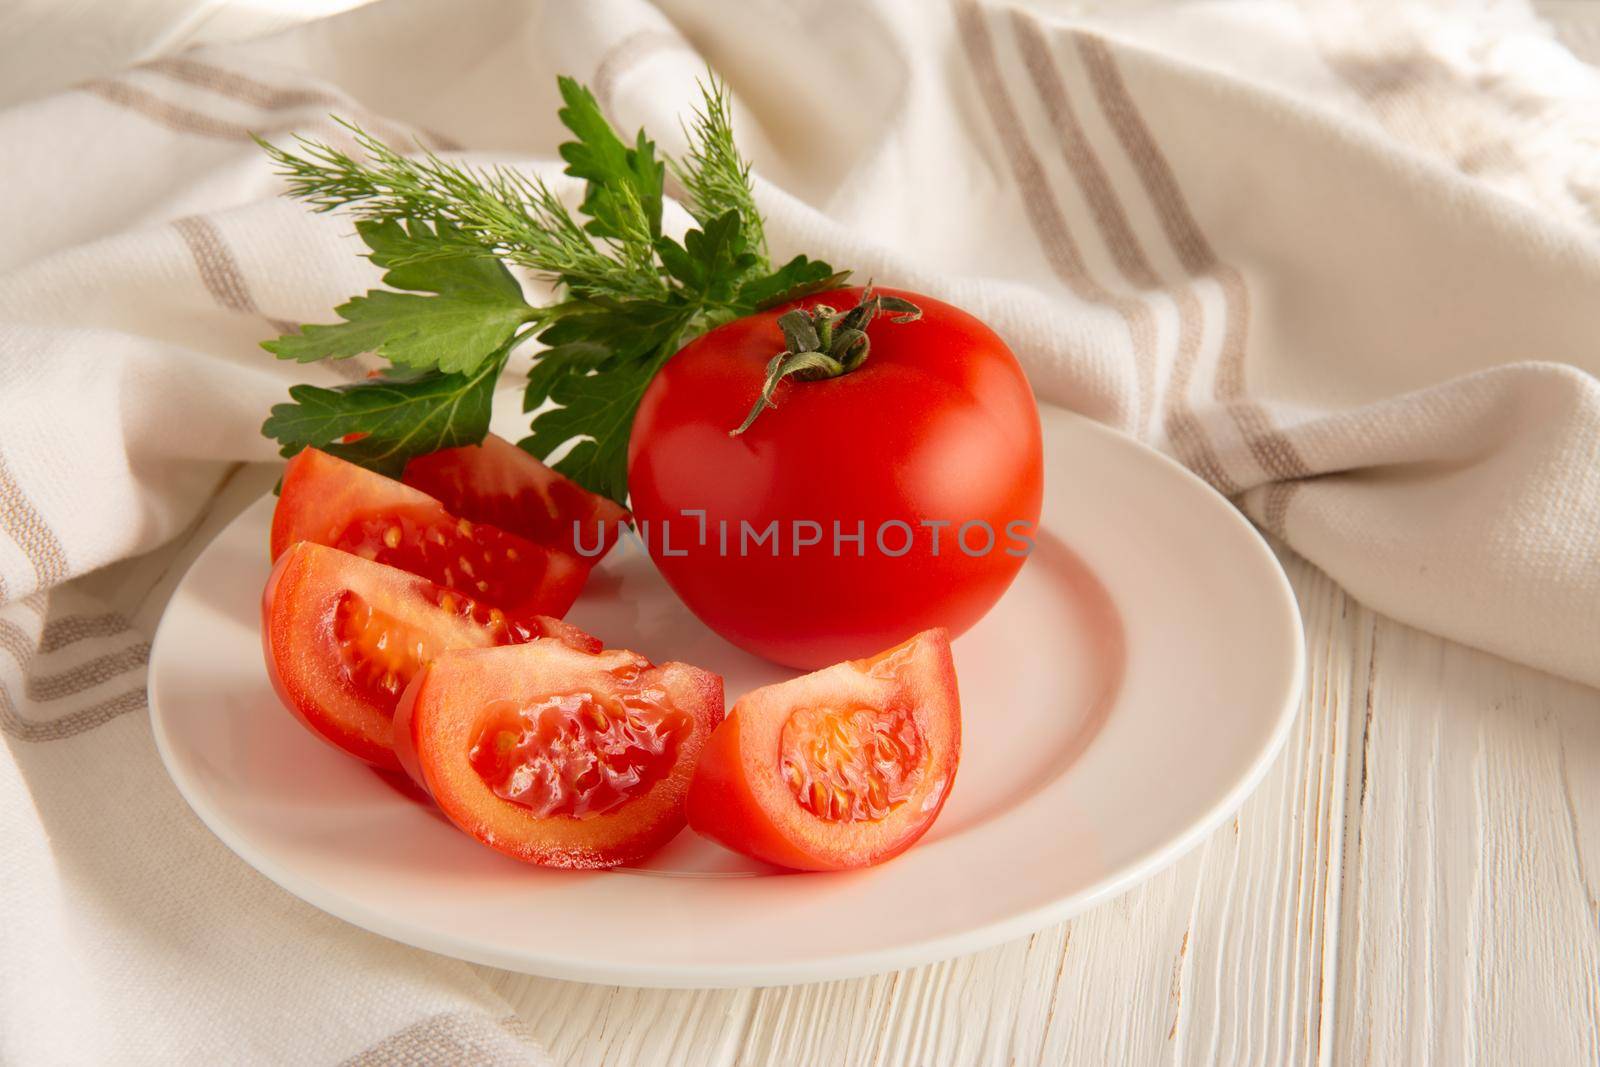 Ripe red tomatoes with a bunch of green parsley on a ceramic plate in a linen towel under soft sunlight